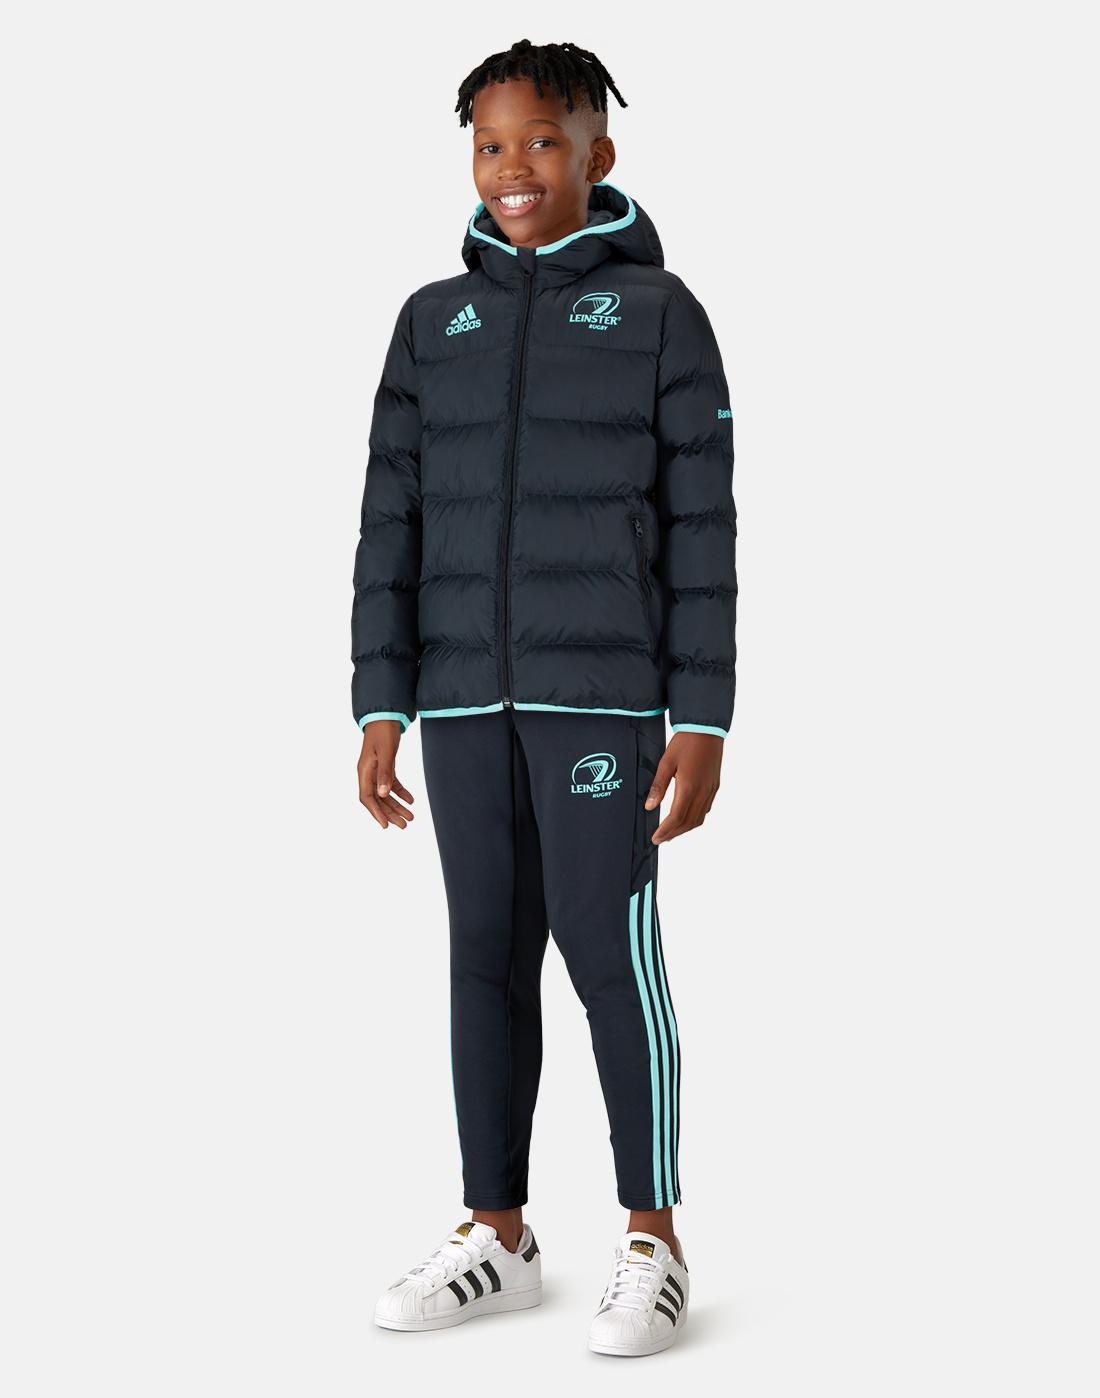 adidas Kids Leinster Winter Jacket - Grey | Life Style Sports IE